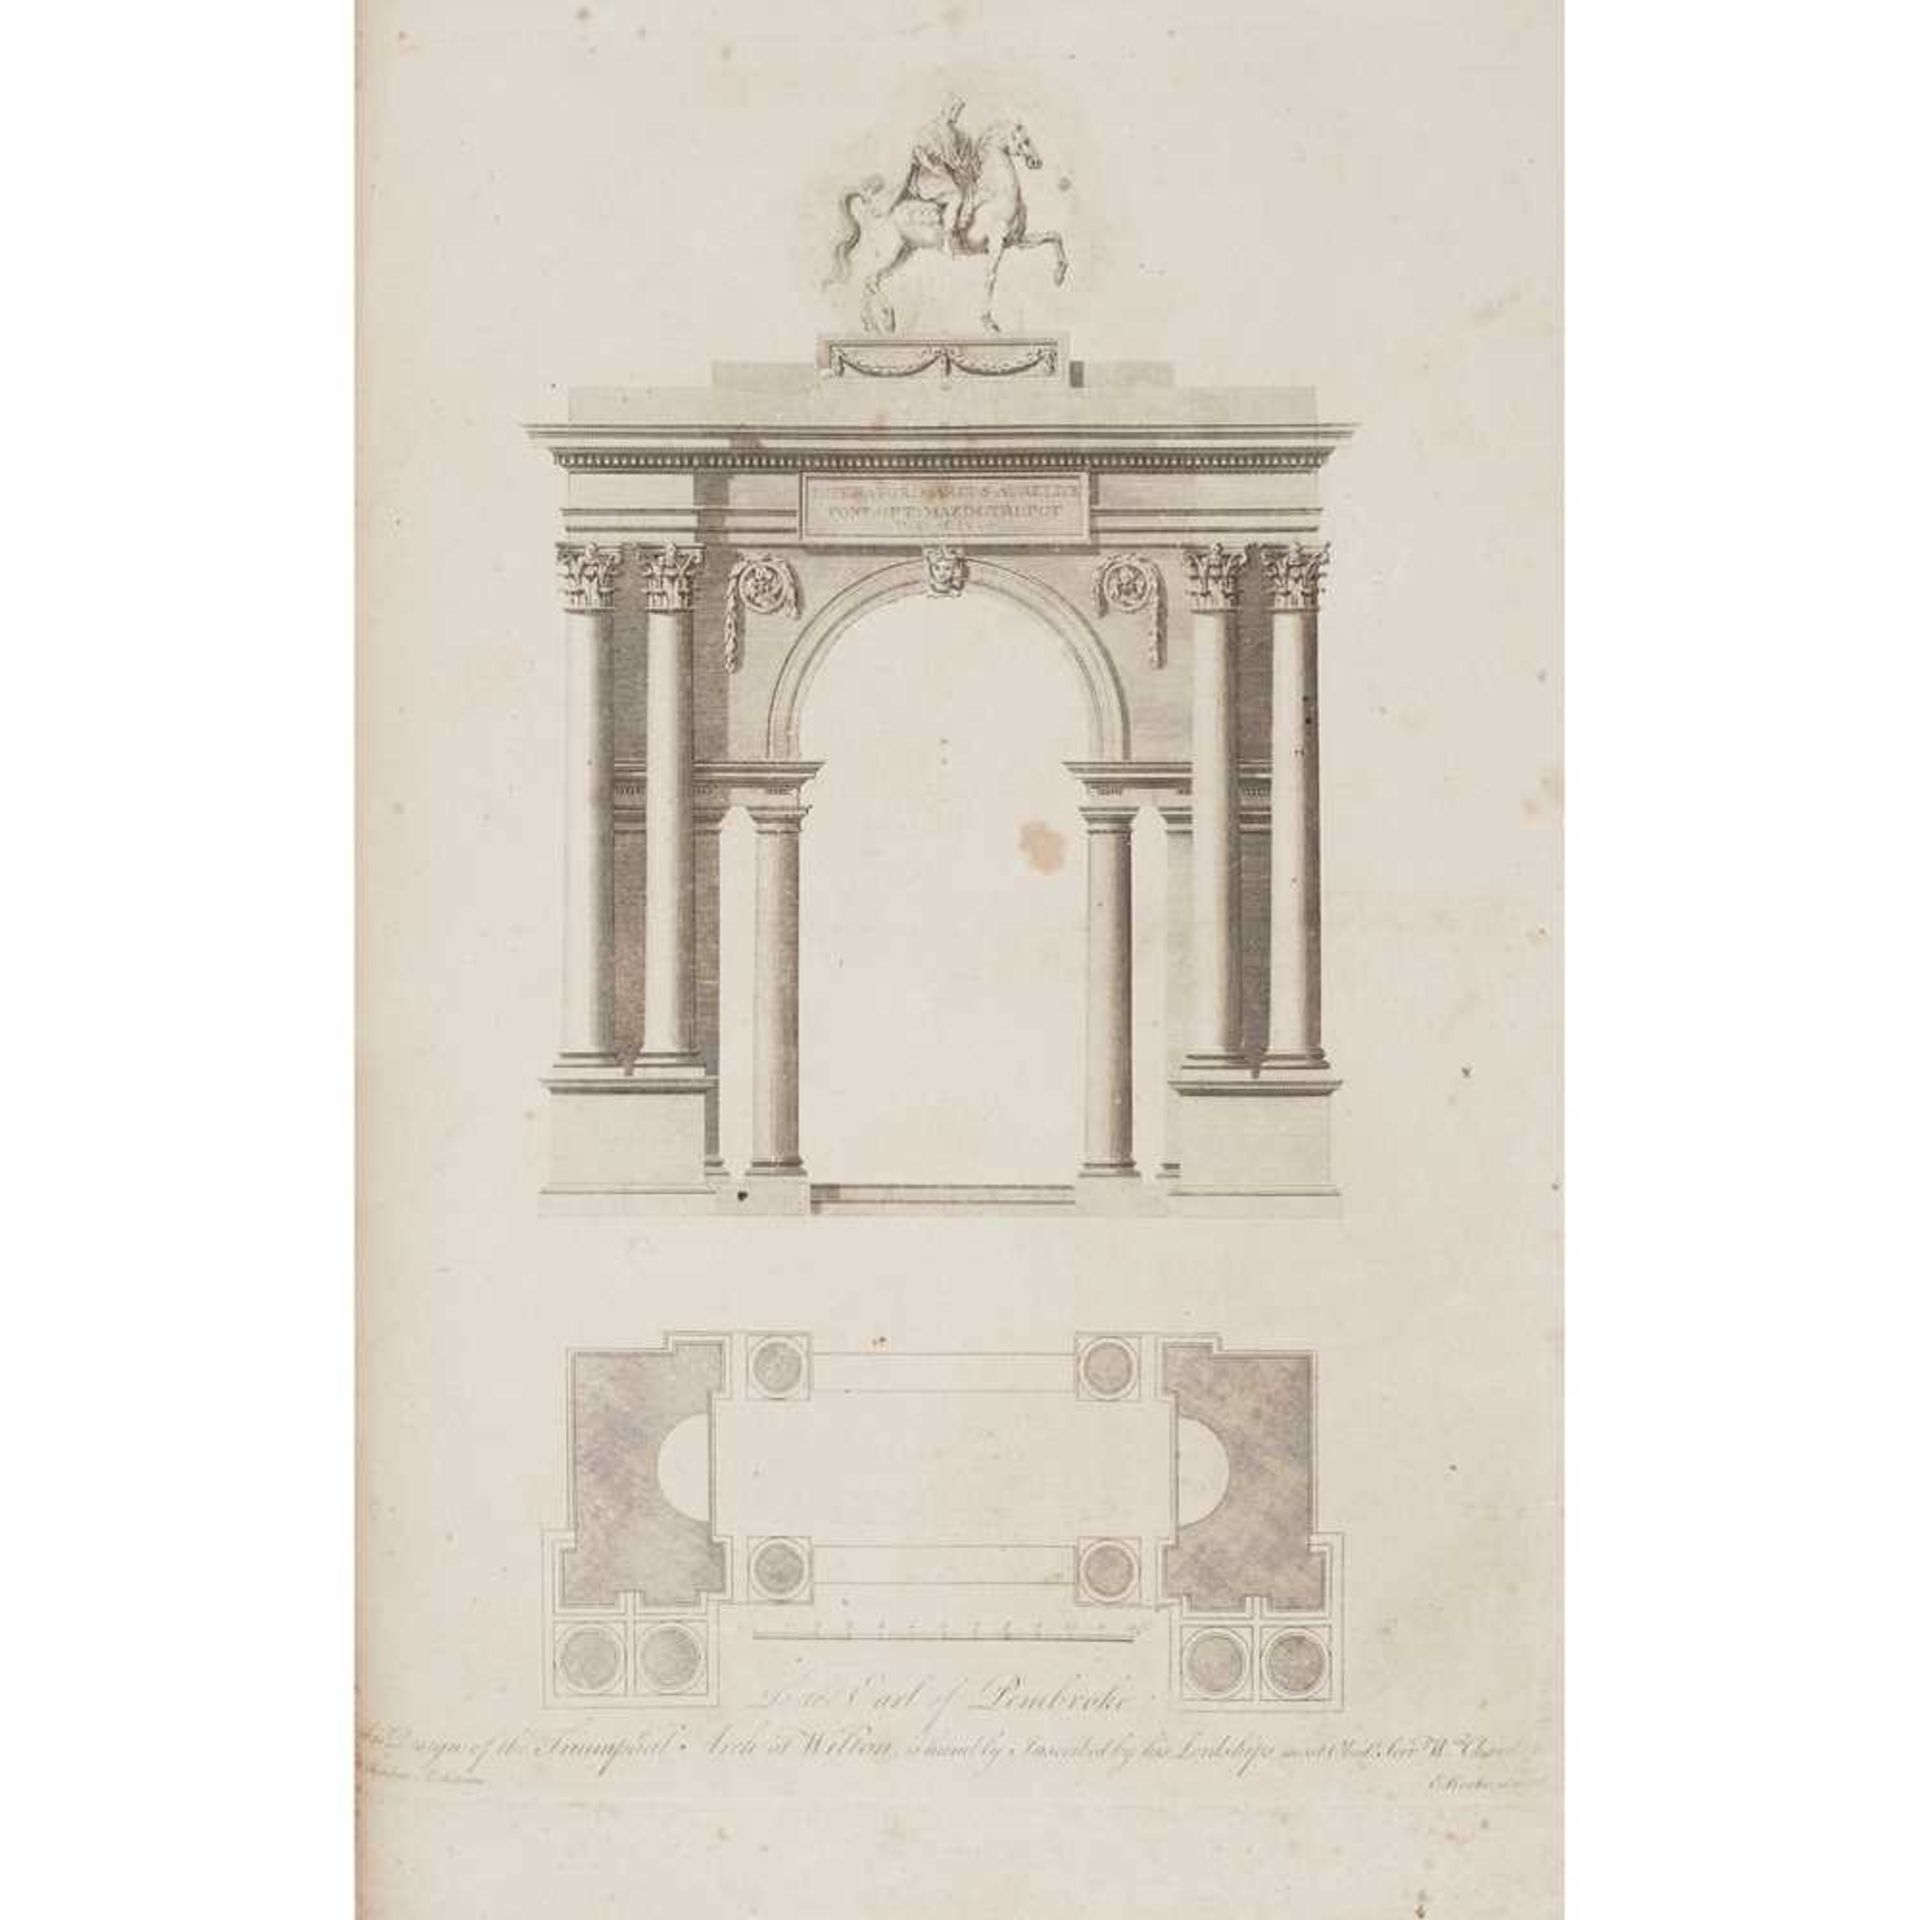 Chambers, William A Treatise on the Decorative Part of Civil Architecture